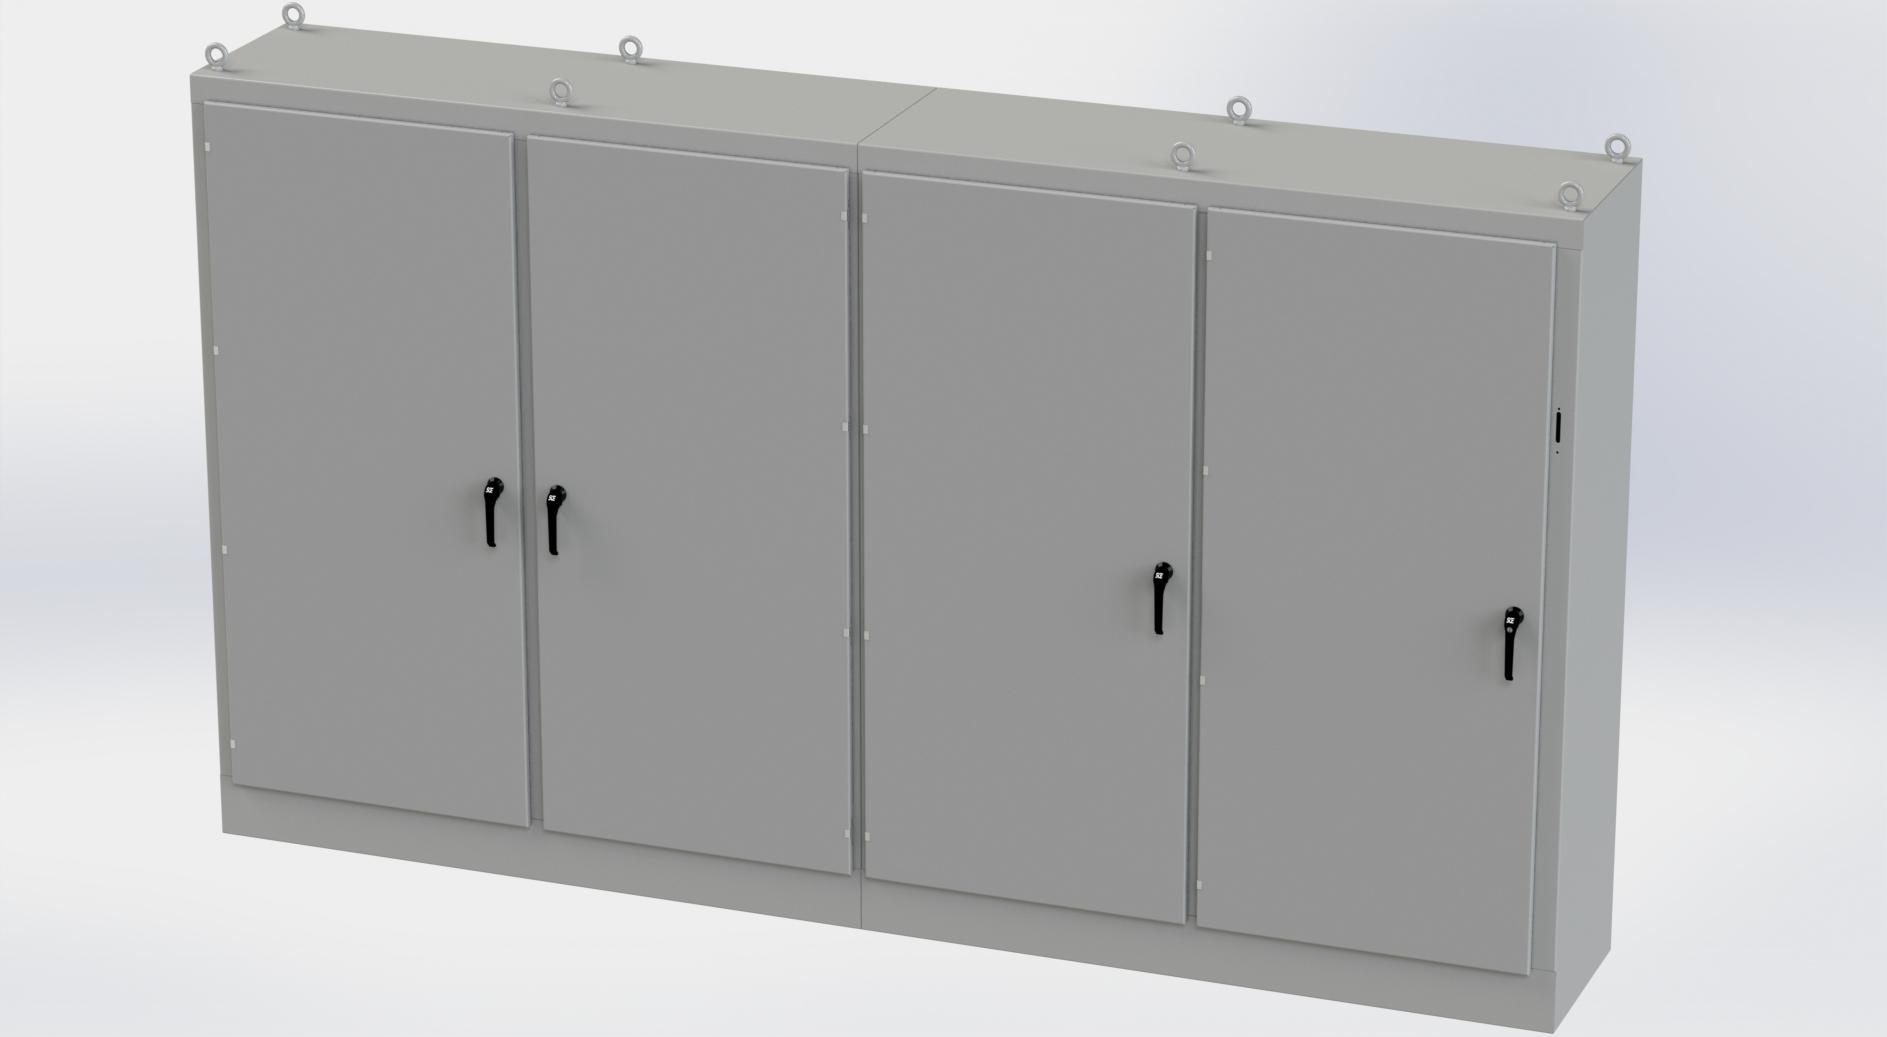 Saginaw Control SCE-90XM4EW24 4DR XM Enclosure, Height:90.00", Width:157.50", Depth:24.00", ANSI-61 gray powder coating inside and out. Subpanels are powder coated white.